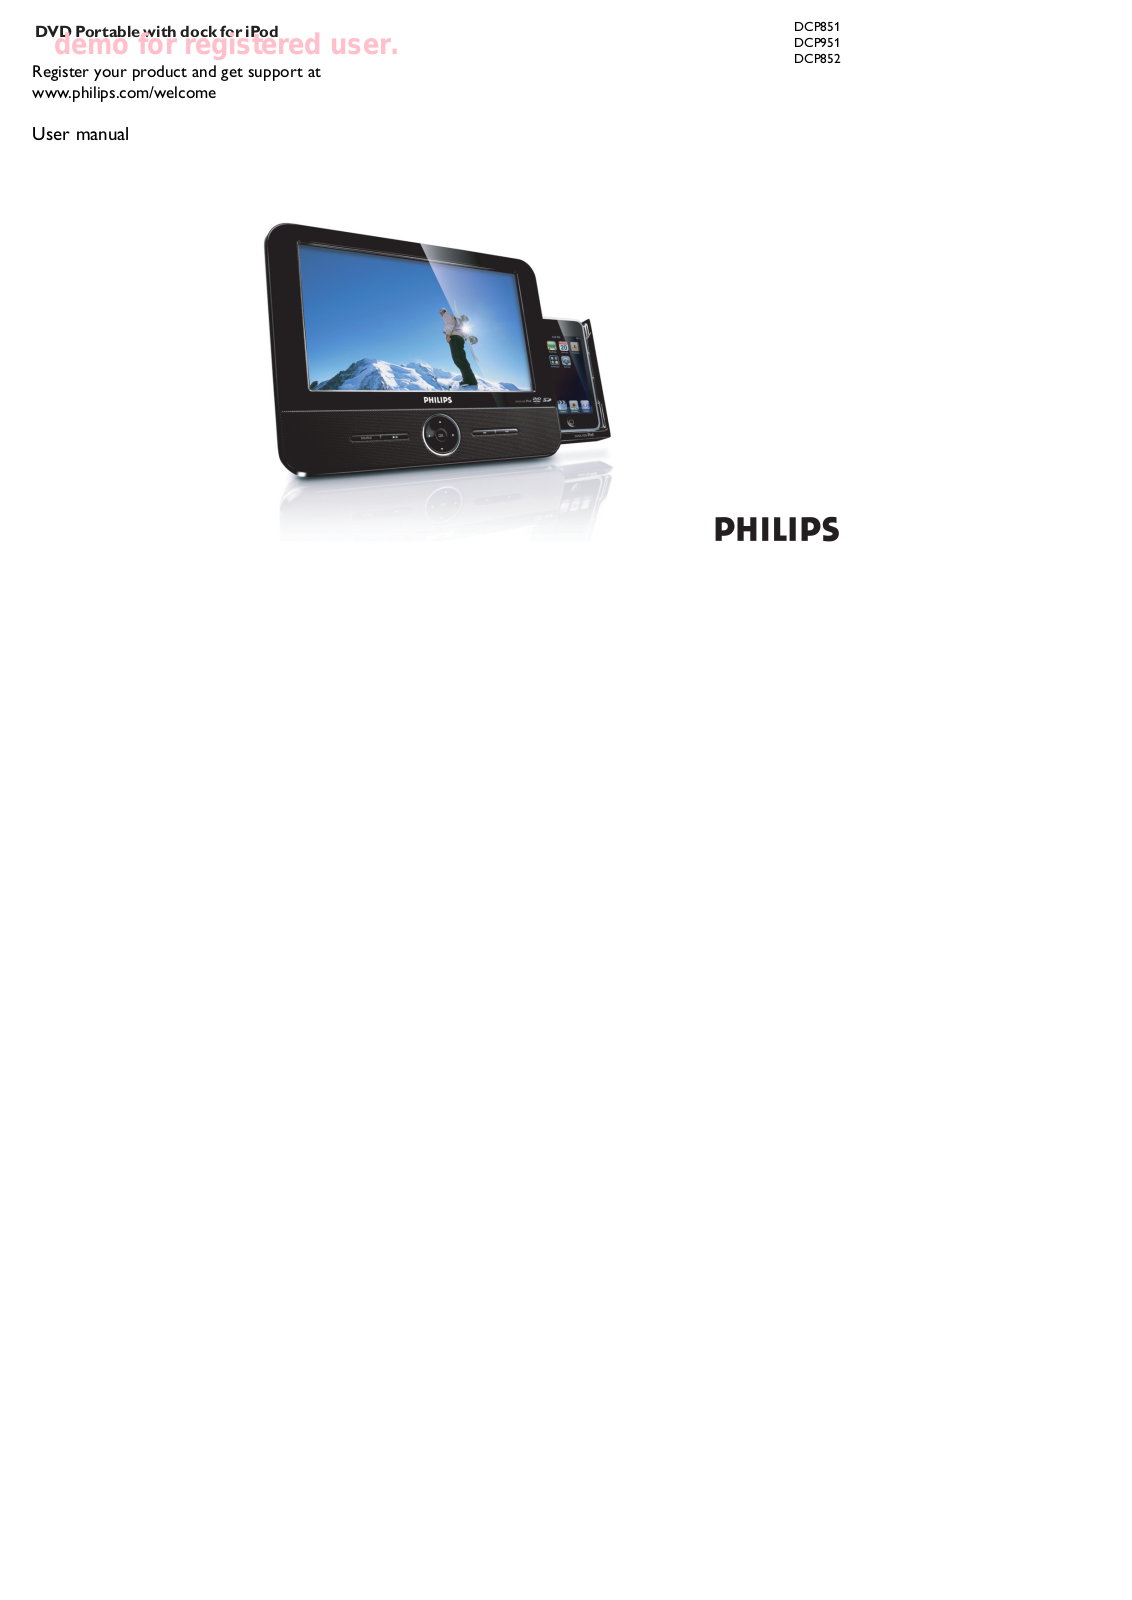 Philips DCP951/05 User Manual